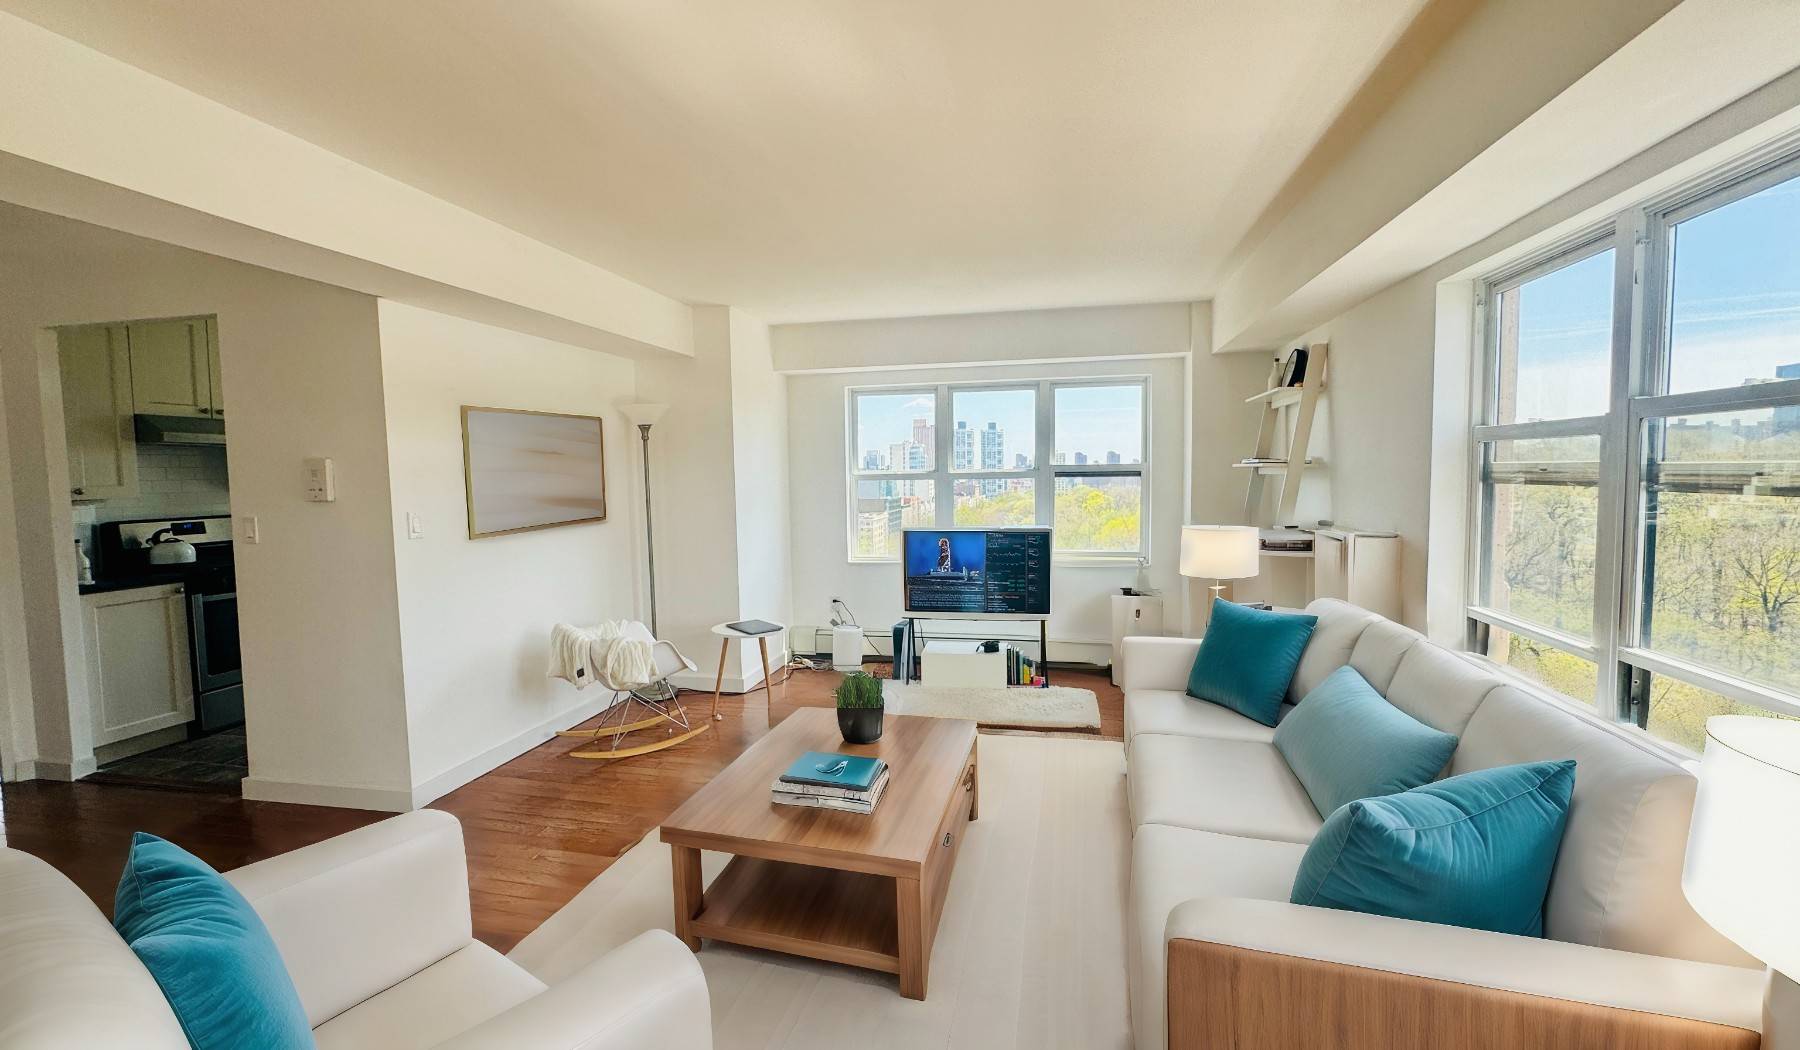 Perched on the Northwest corner of Central Park, this delightful 1BR apartment offers breathtaking views of Central Park and surrounding greenery.